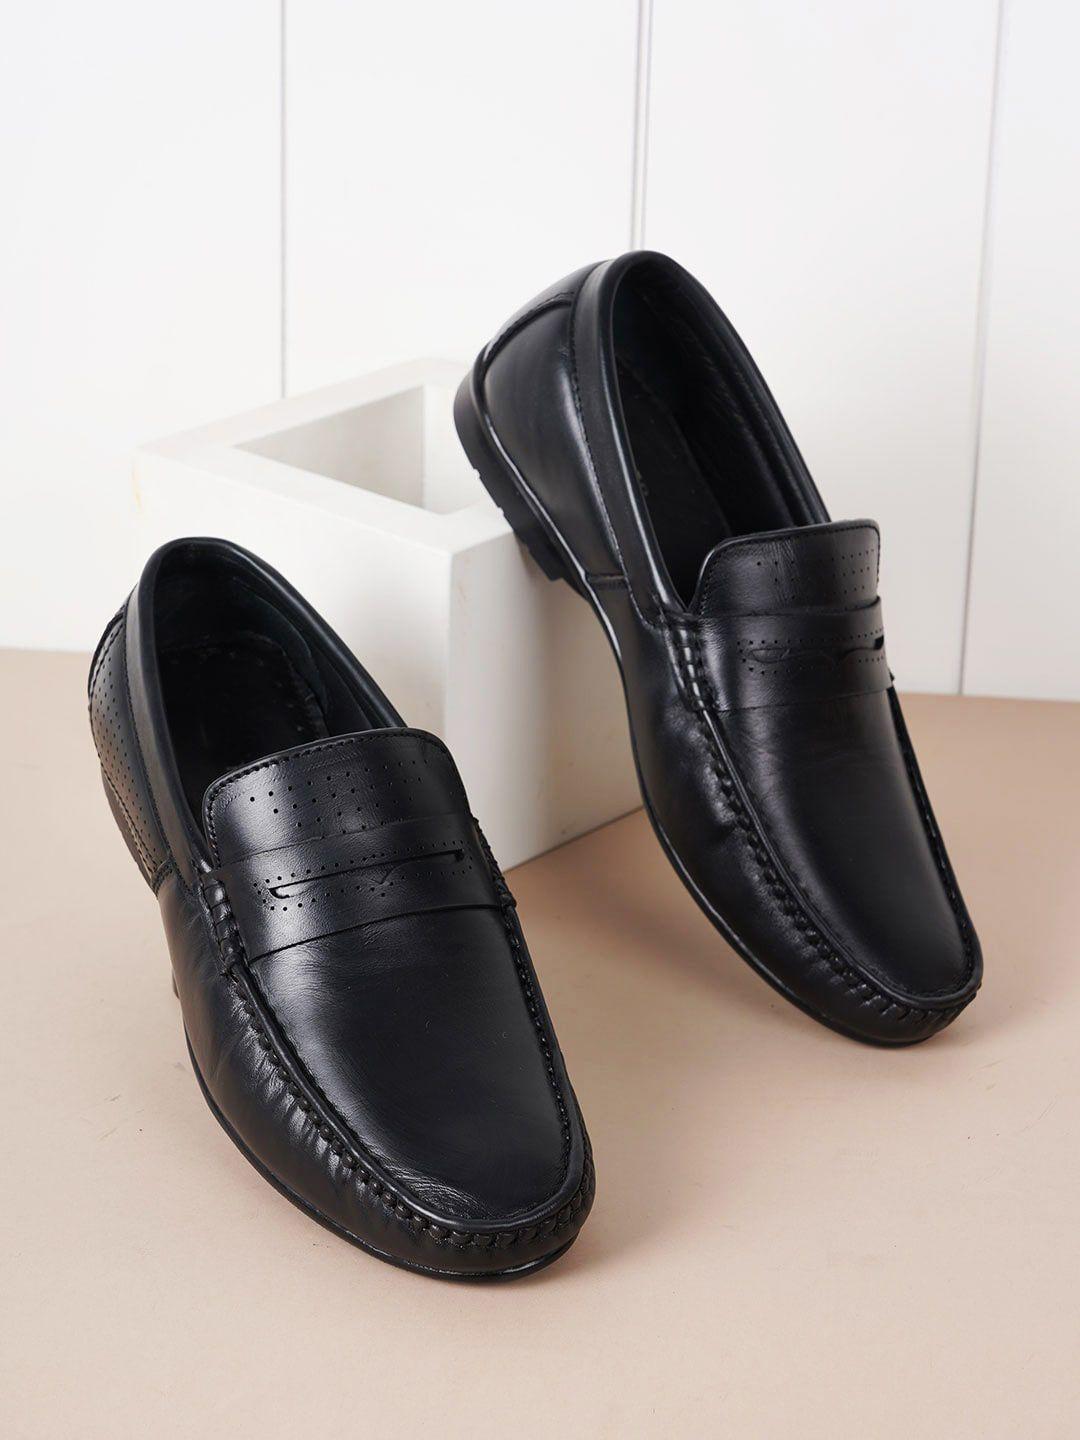 style shoes men perforated leather formal loafers